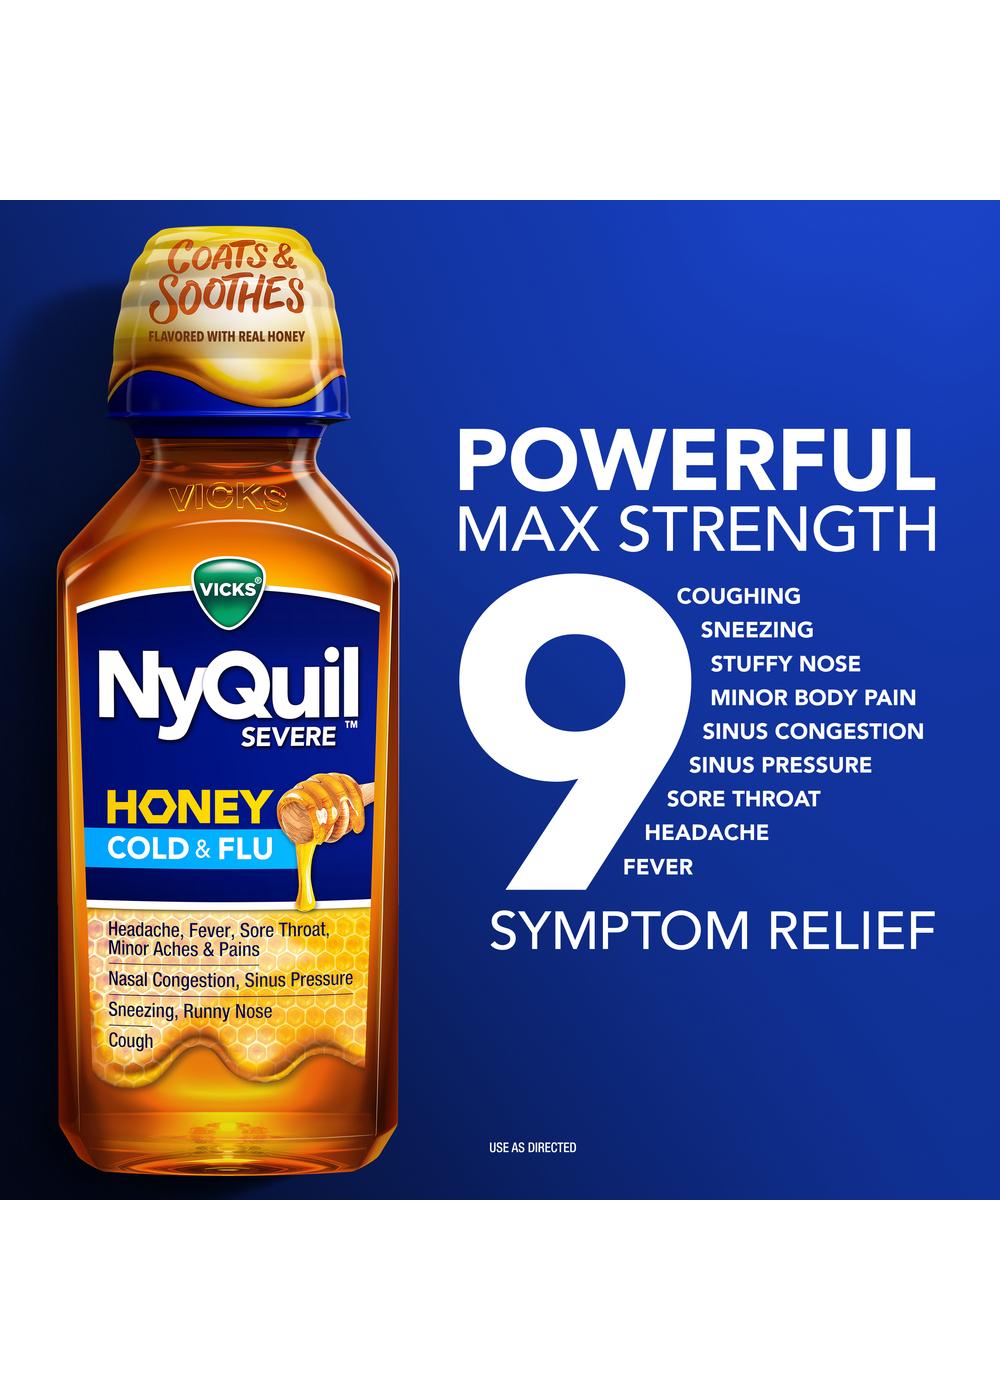 Vicks NyQuil SEVERE Cold & Flu Liquid - Honey; image 3 of 11